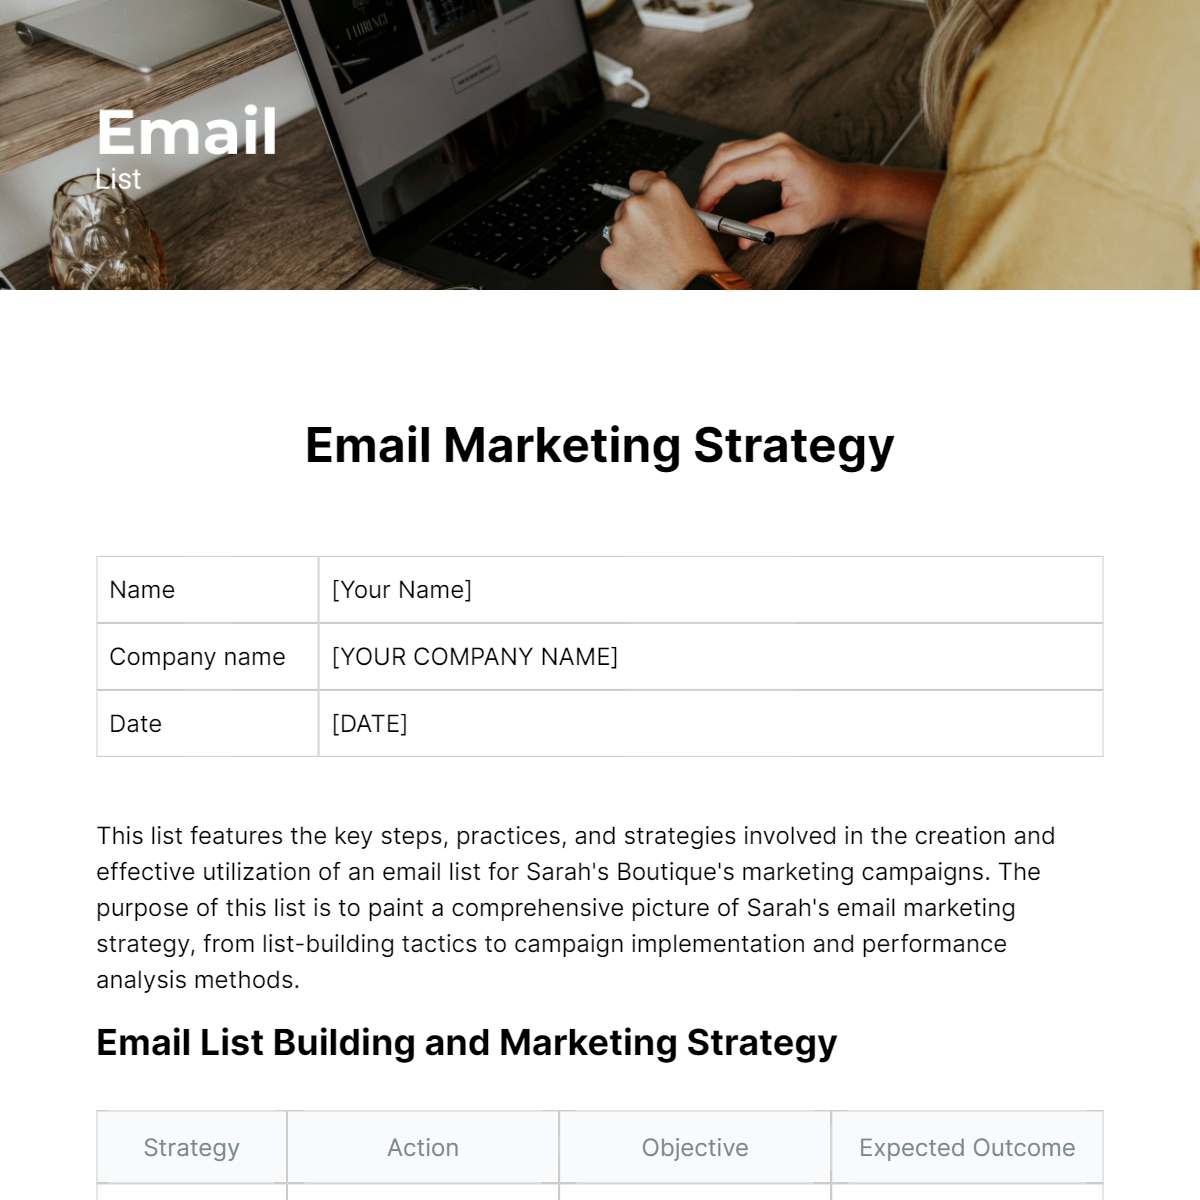 Email List Template